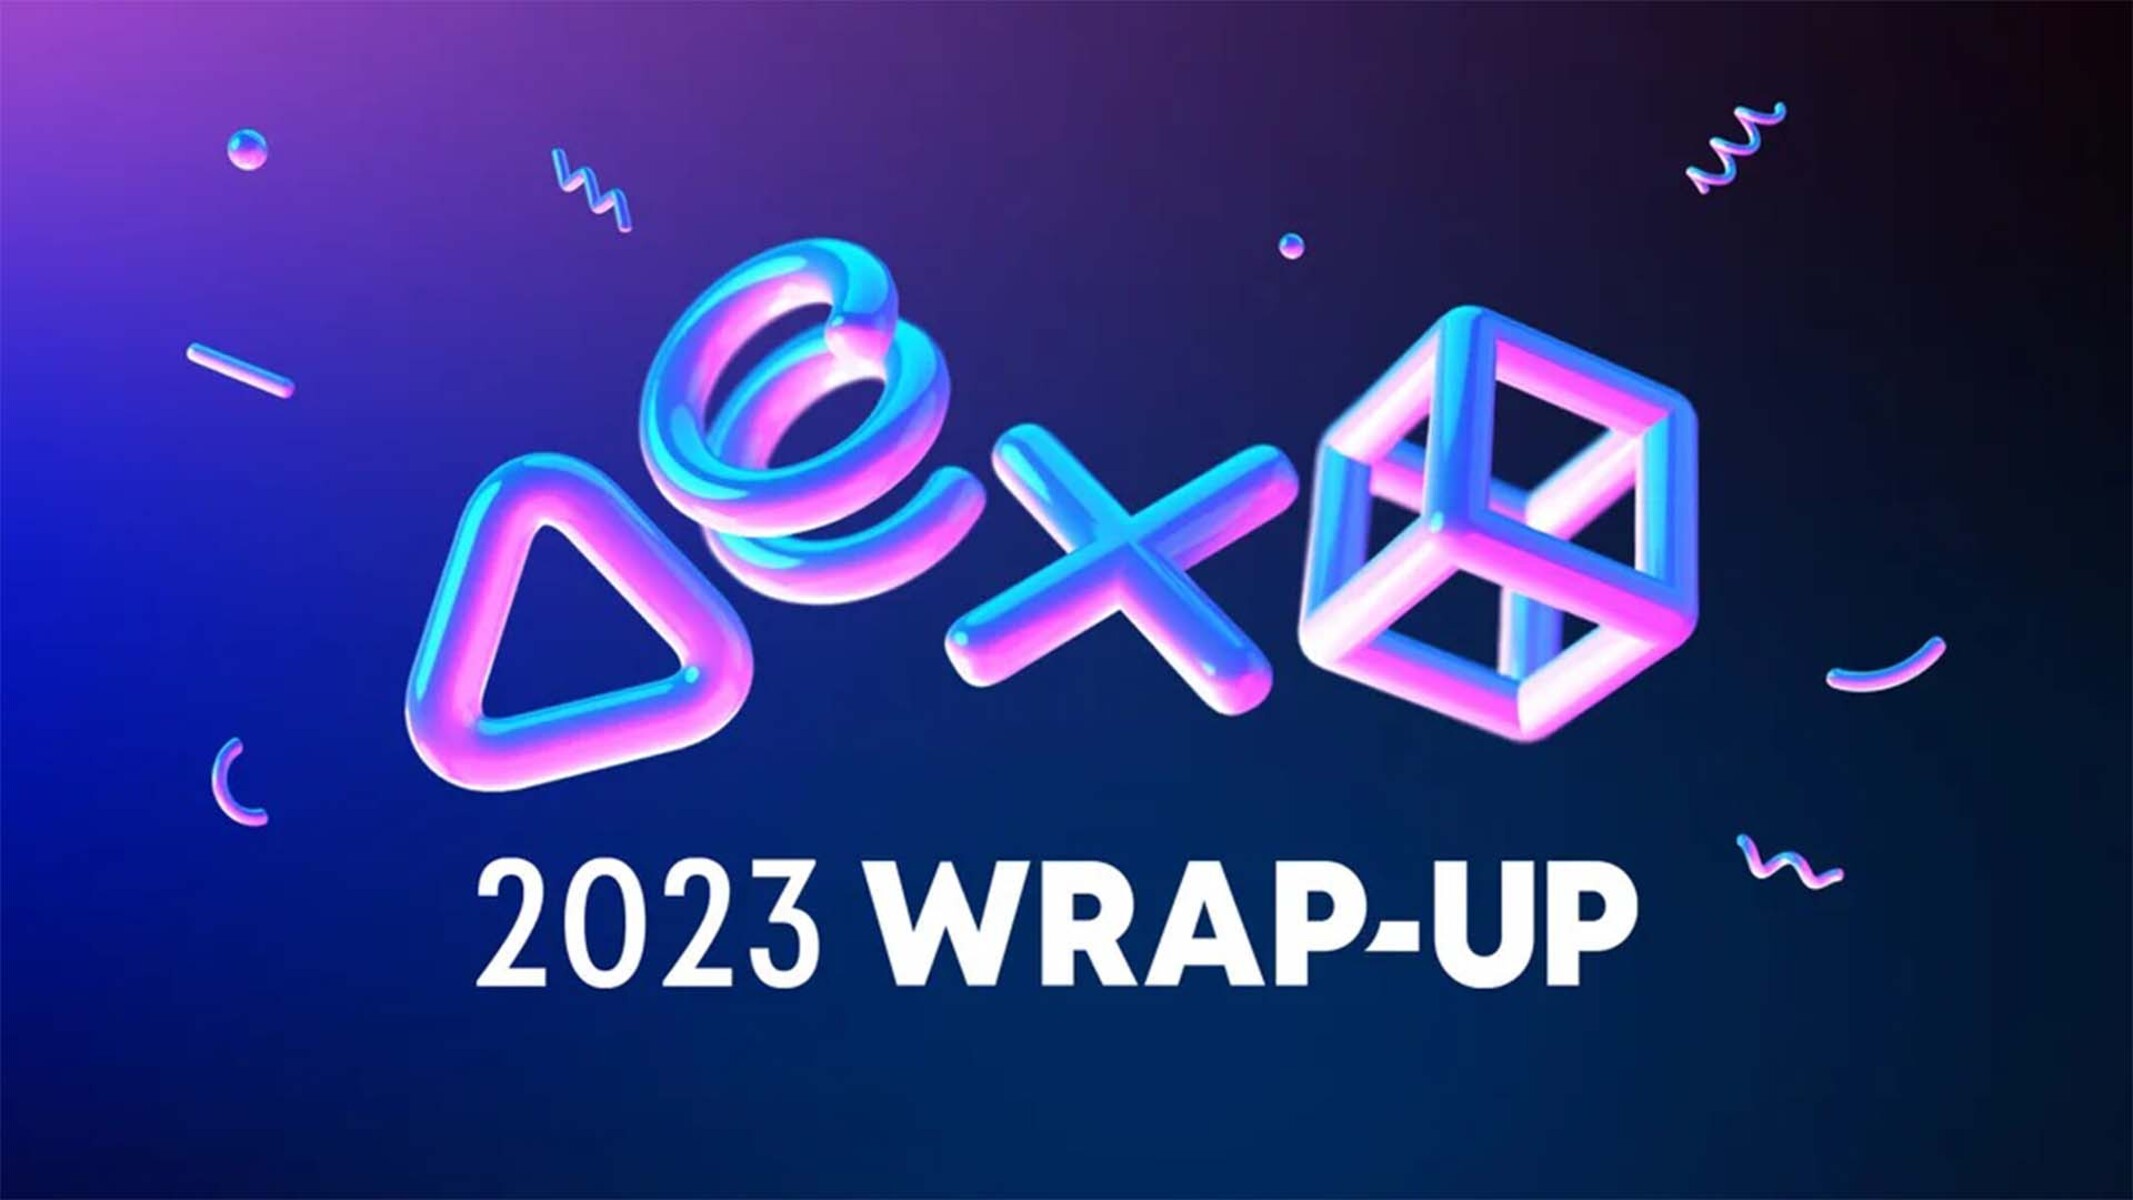 media Play Station 2023 Wrap Up 1